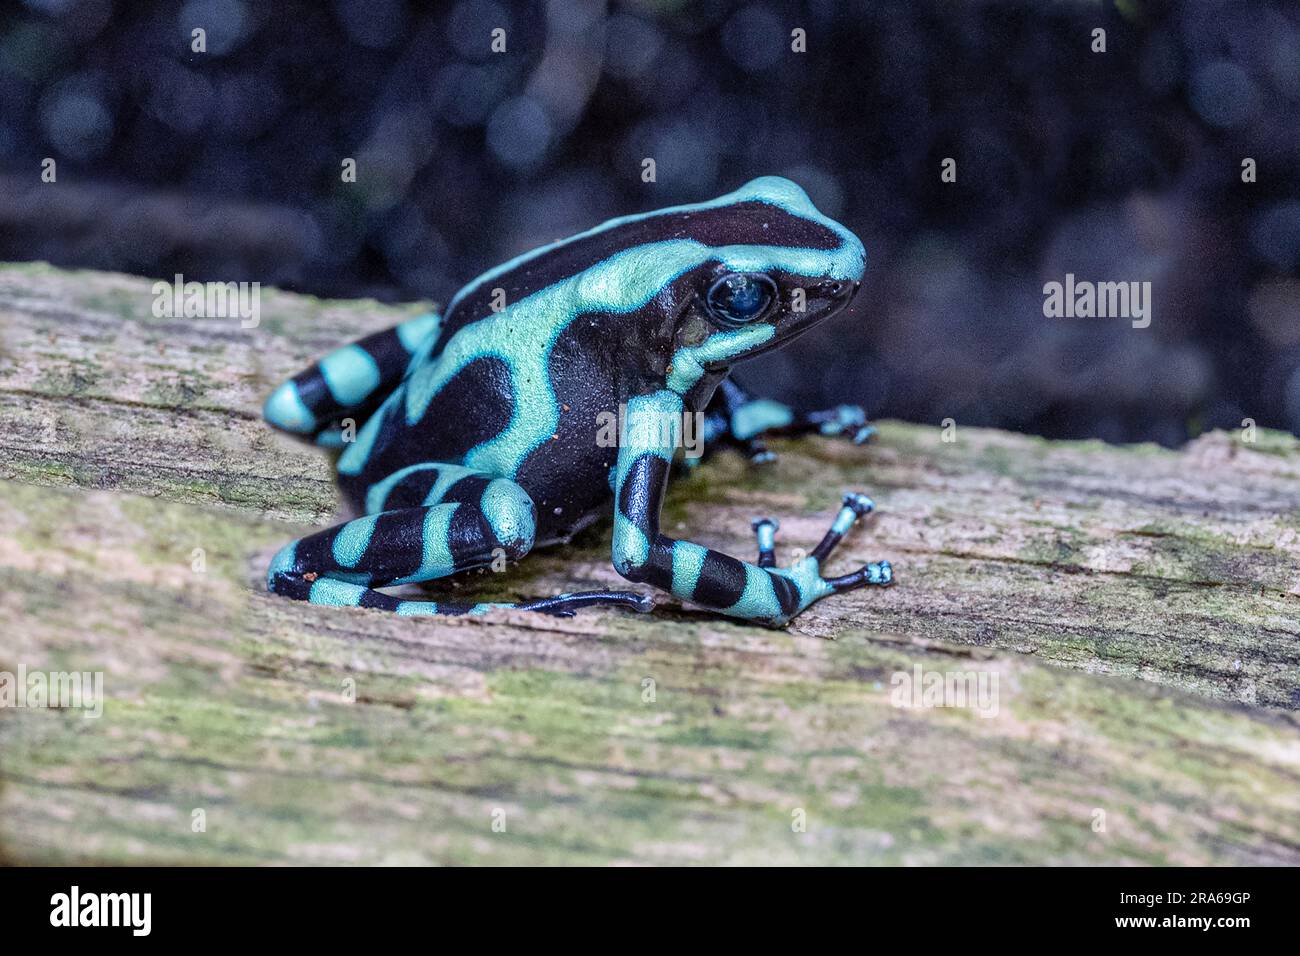 Green & Black Poison Dart Frog, Dendrobates auratus. Its bright aposematic coloration warns predators that it is poison and serves as a defense. Stock Photo